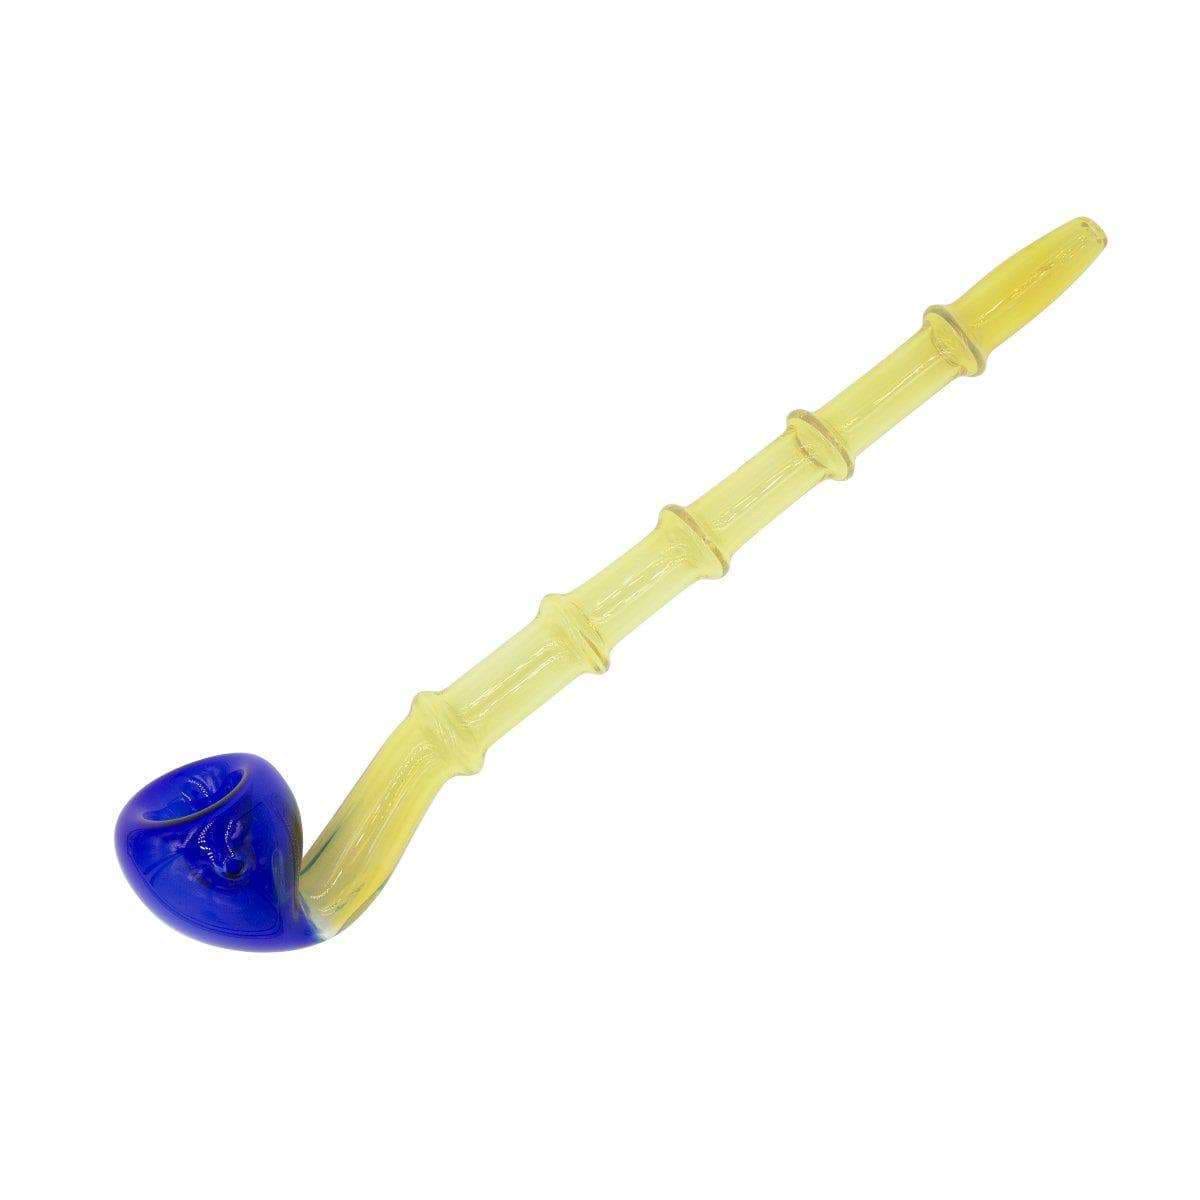 8-inch long curved glass pipe smoking device with ridges easy grip yellow blue cane golf club shape Hobbit-inspired design